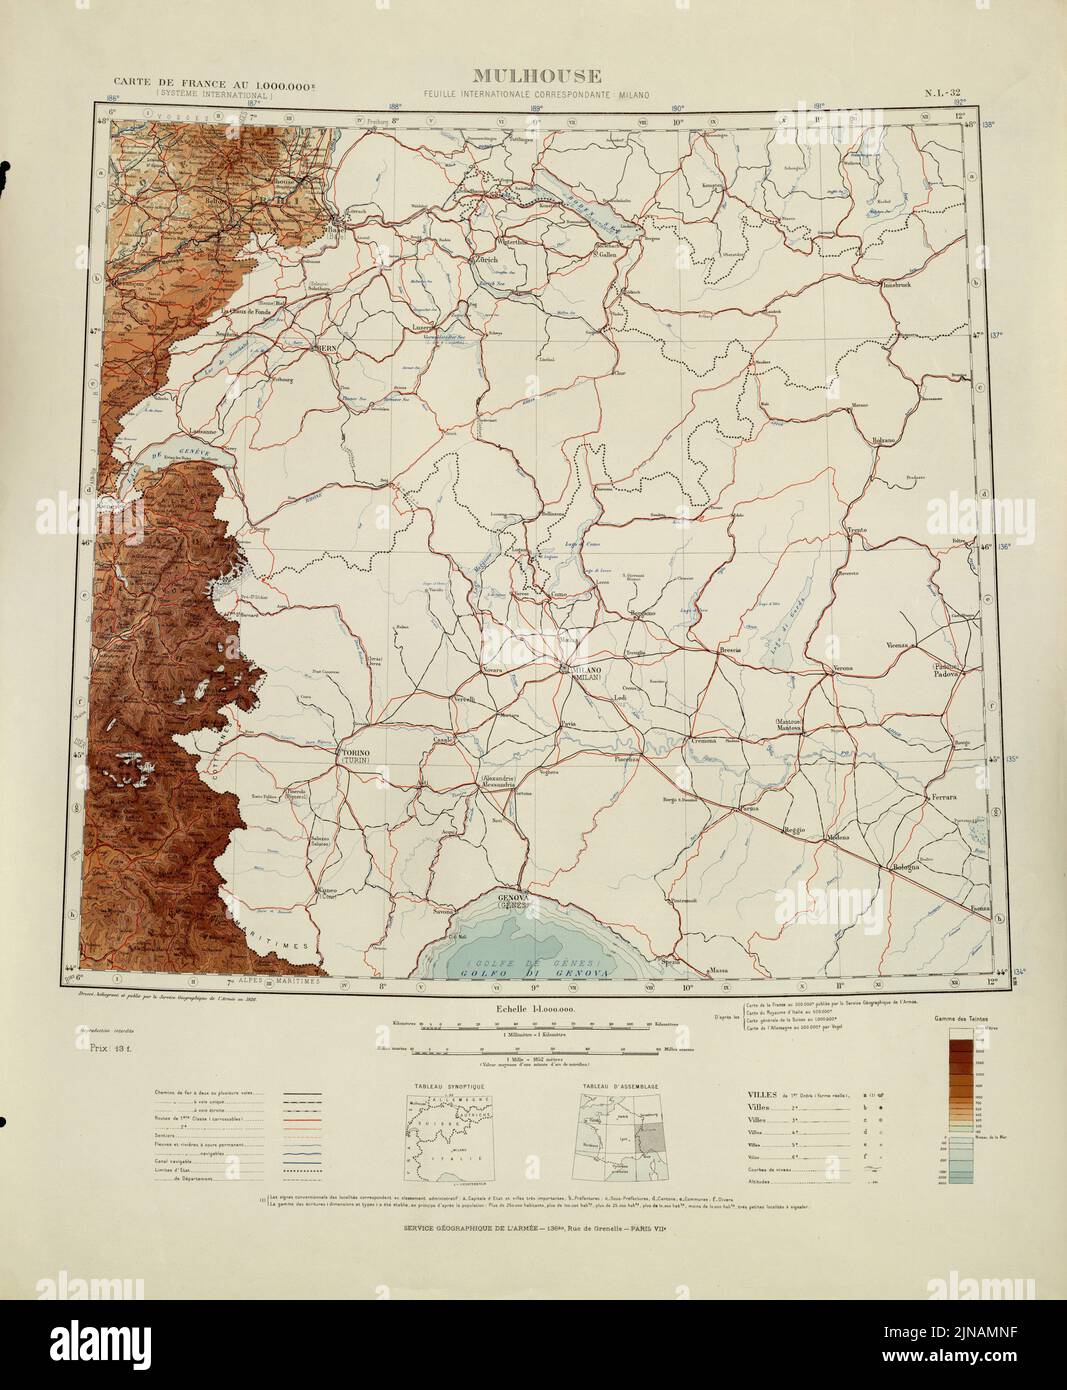 Frankreich Karte, Frankreich Karte, Frankreich Plan, Alt Frankreich Karte, Retro Frankreich Karte, Vintage France Map, France Poster, Old Europe Map, Vintage Europe Map Stockfoto